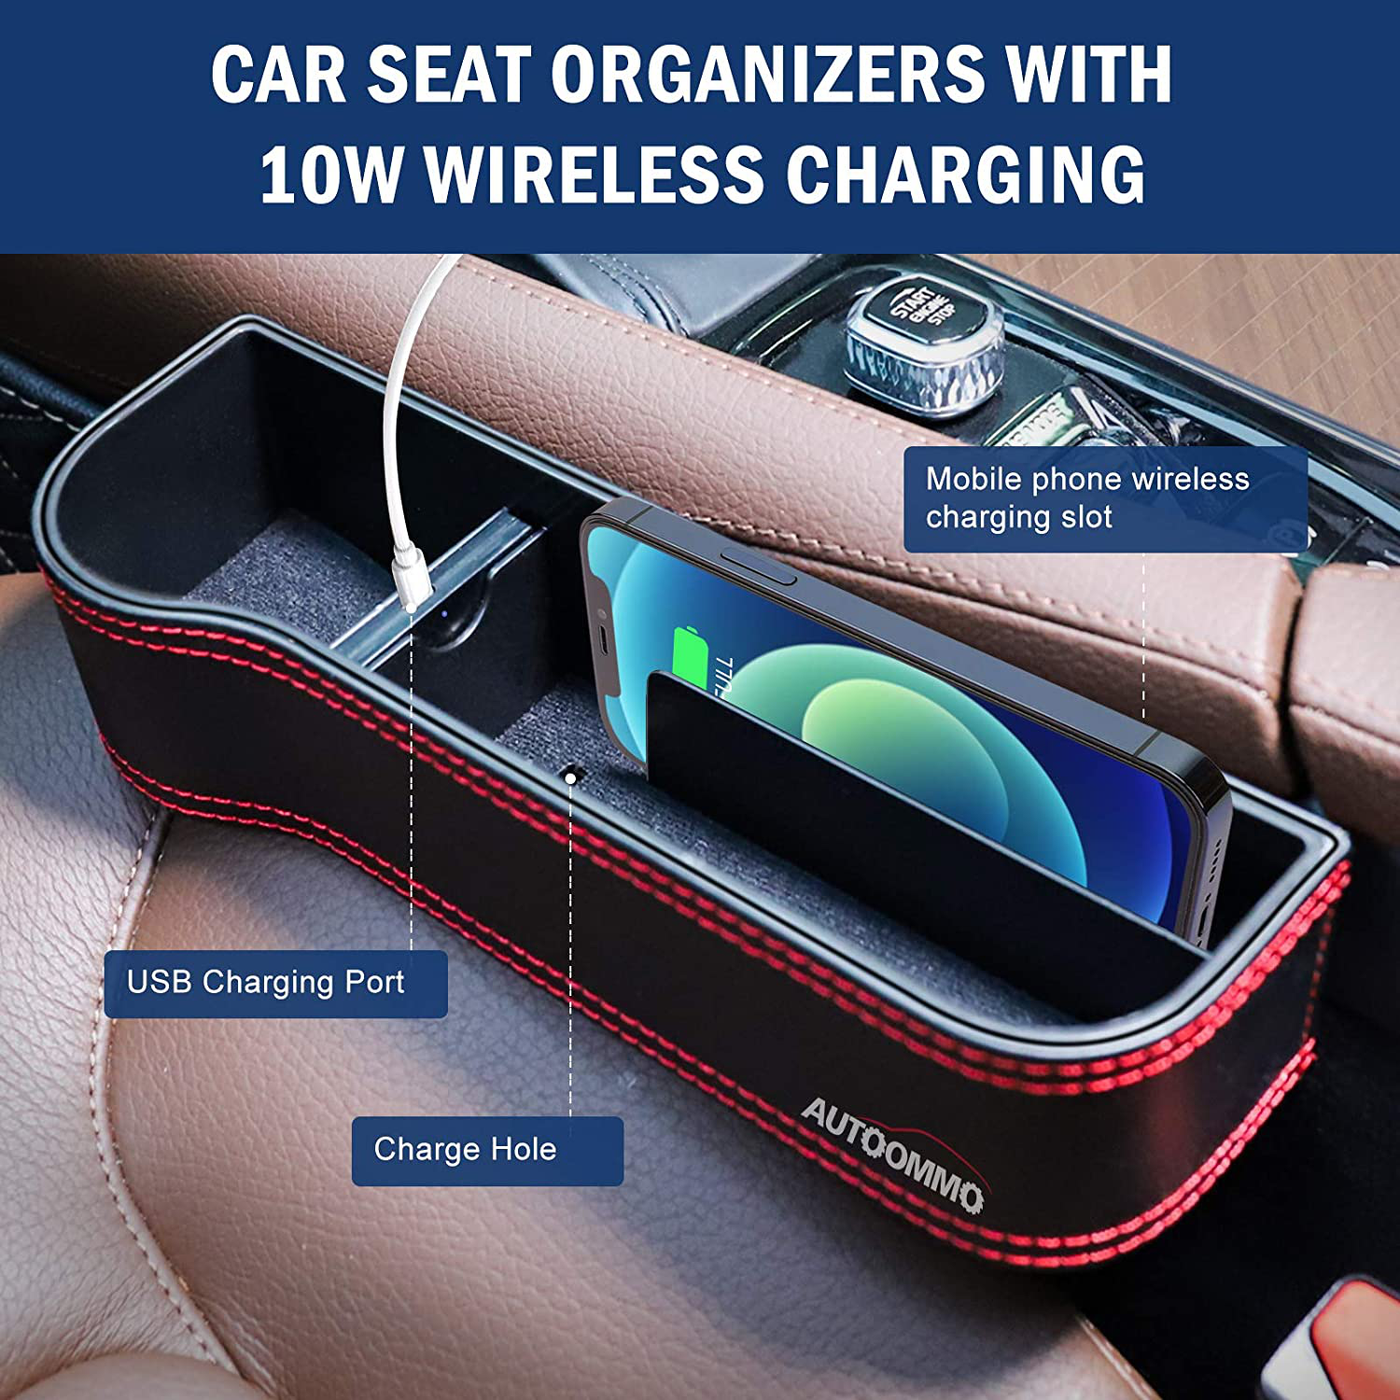 Car Seat Gap Filler - AUTOOMMO 2 Pack Car Seat Gap Organizer with 10W Wireless Charging Car Front Seat Organizer PU Leather Console Side Storage for Phones Wallets Keys Sunglasses